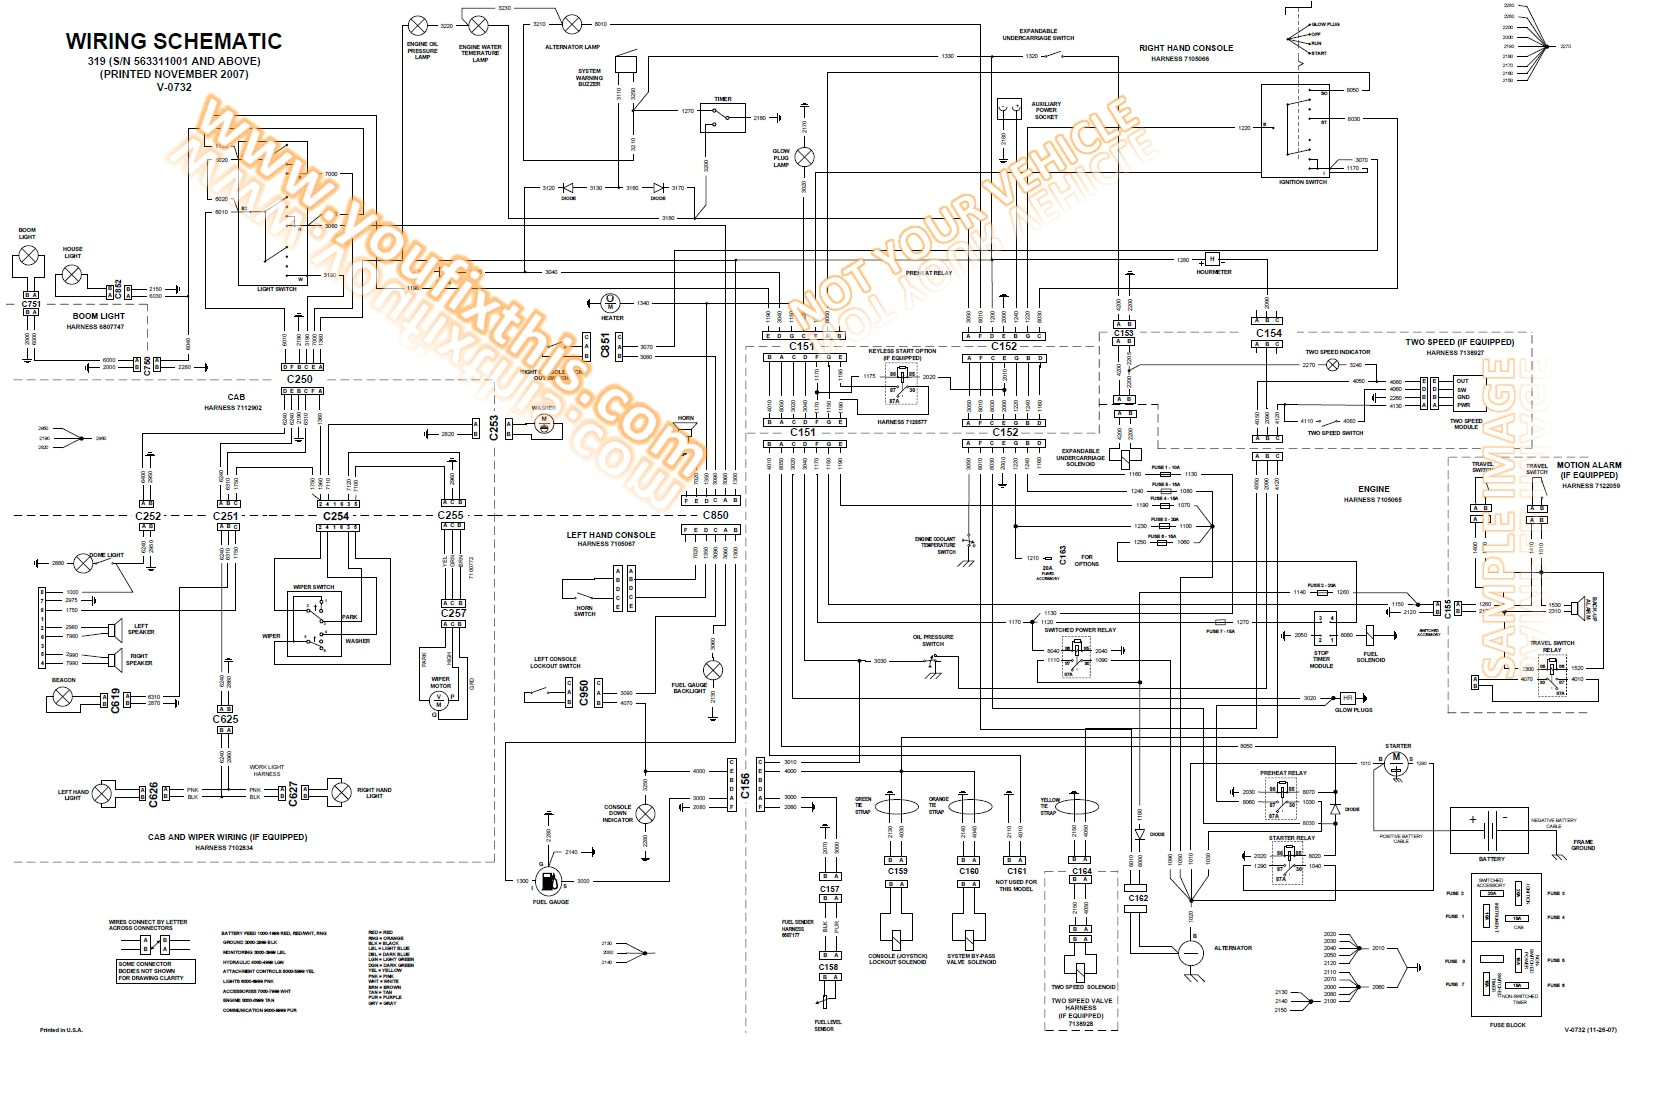 bobcat t190 wiring diagram showy 773 schematic with bobcat t190 wiring diagram png